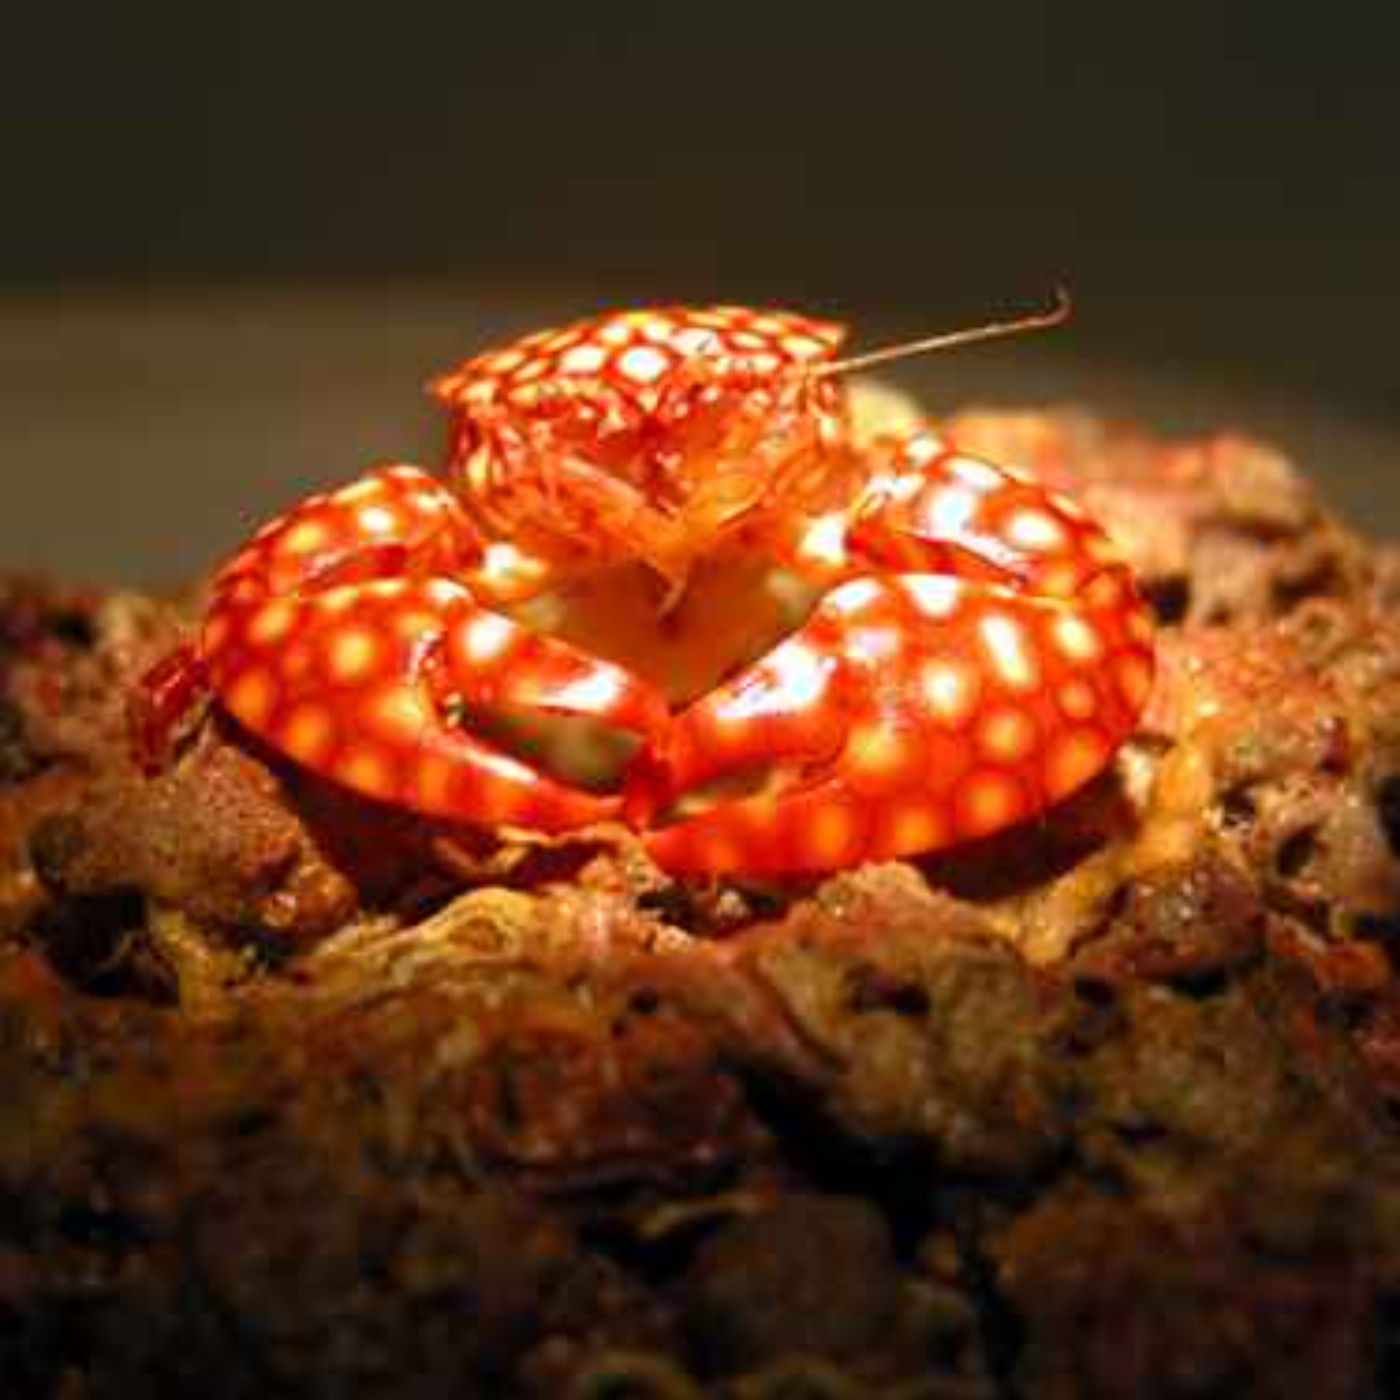 Facts: The Porcelain Crab